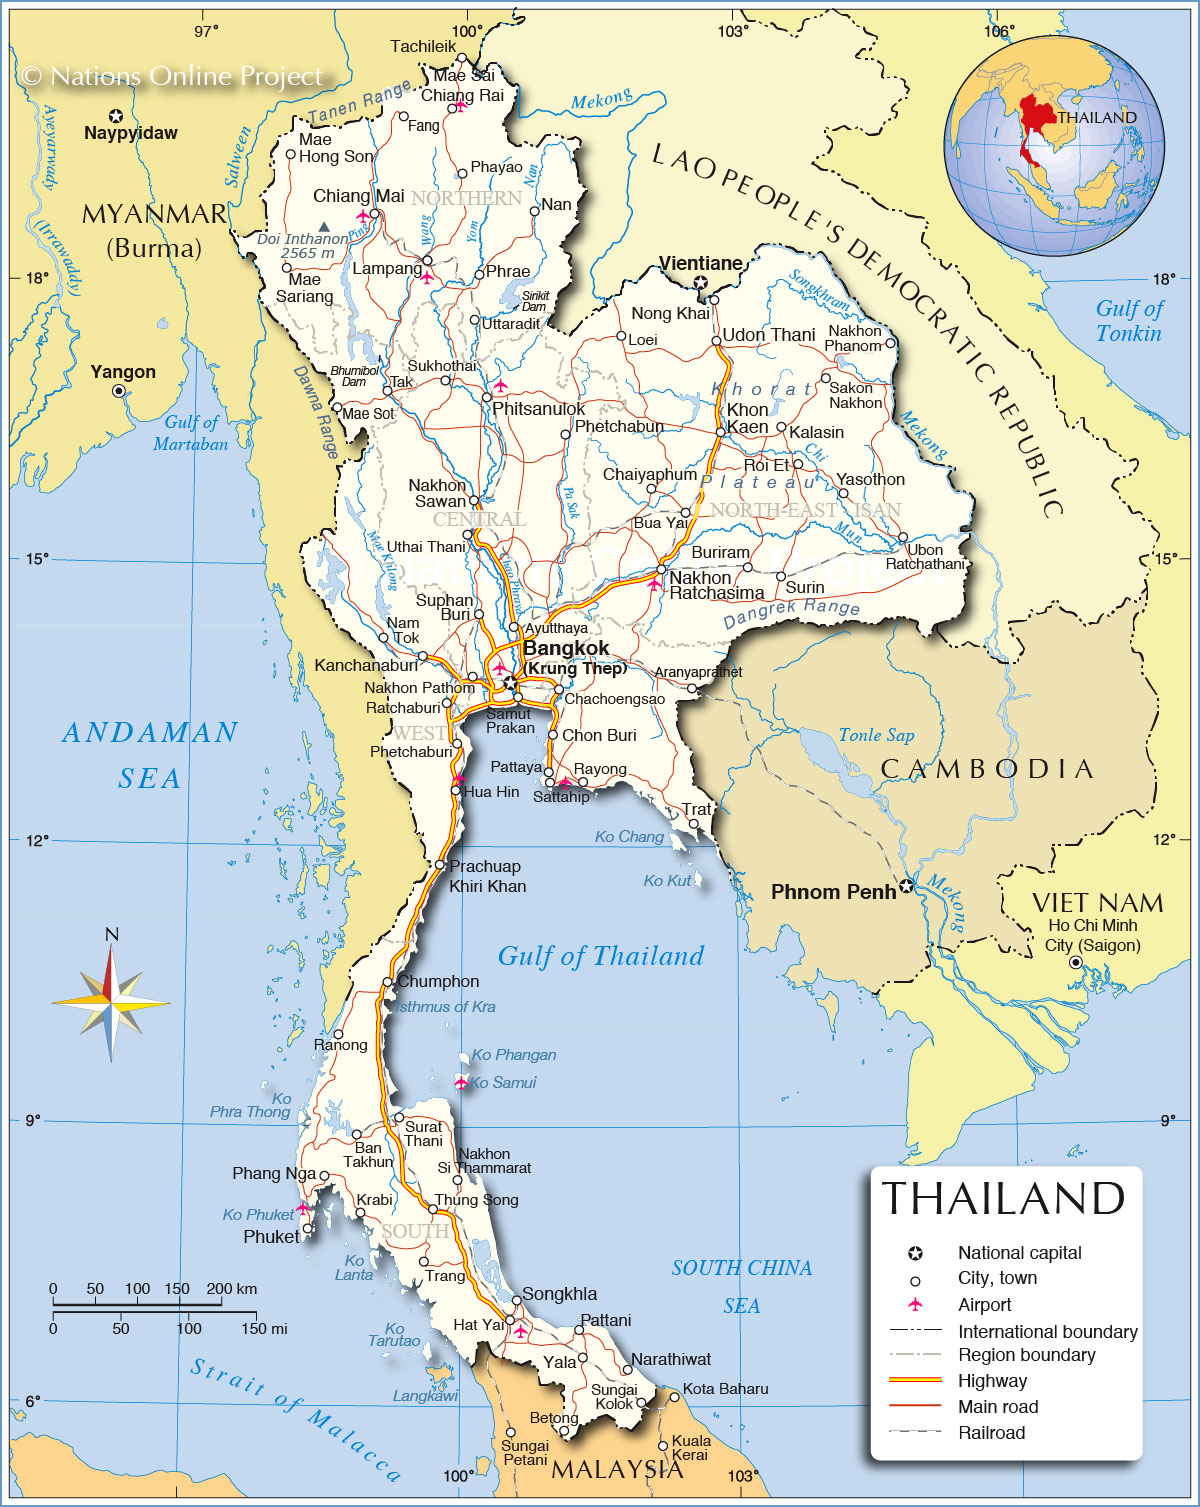 Thailand The official